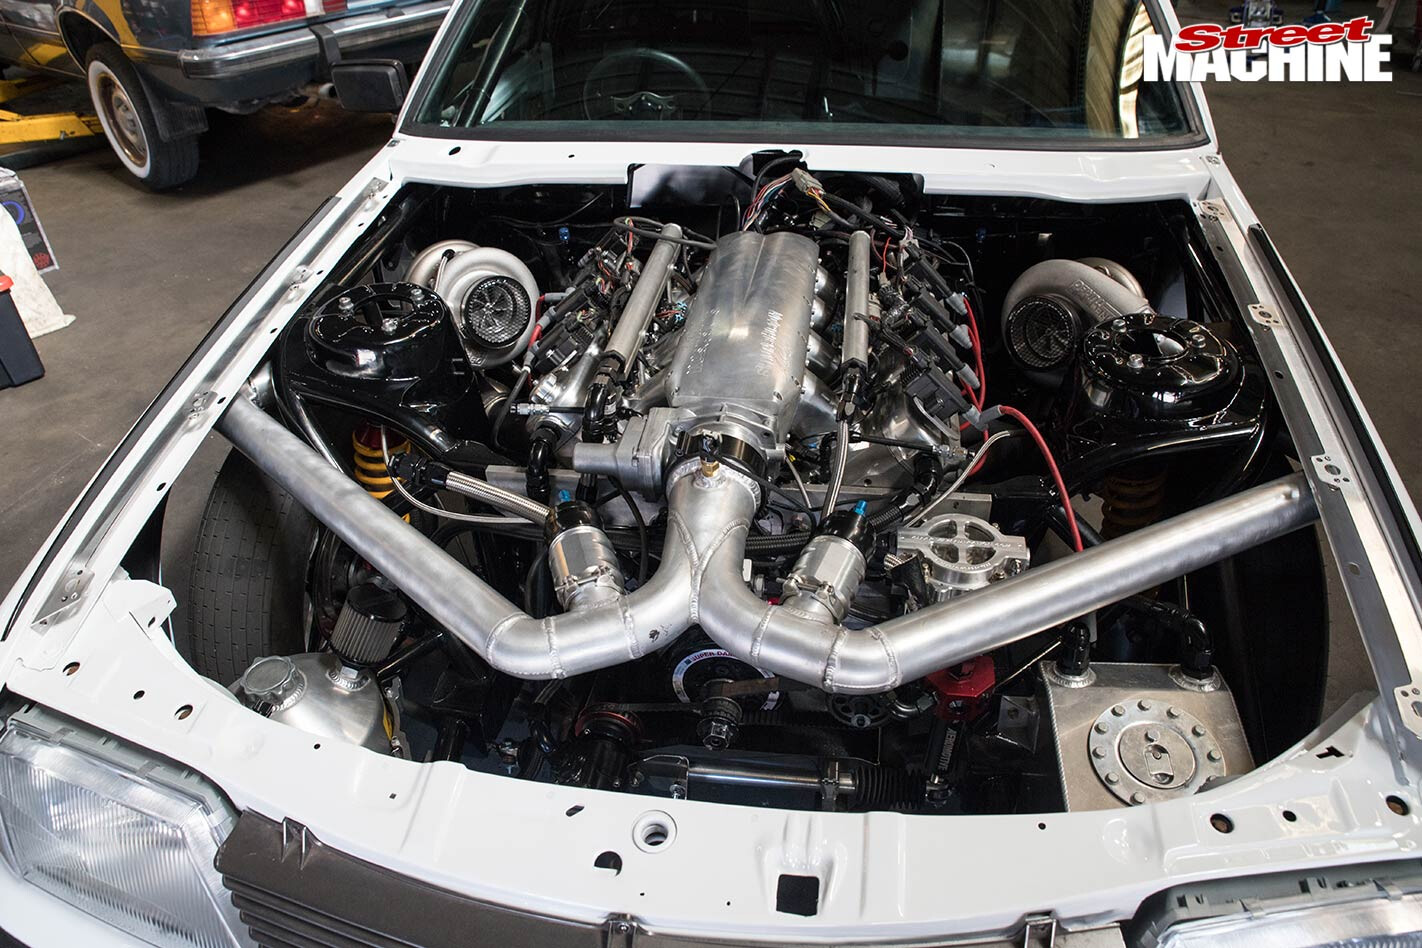 holden vh commodore engine bay